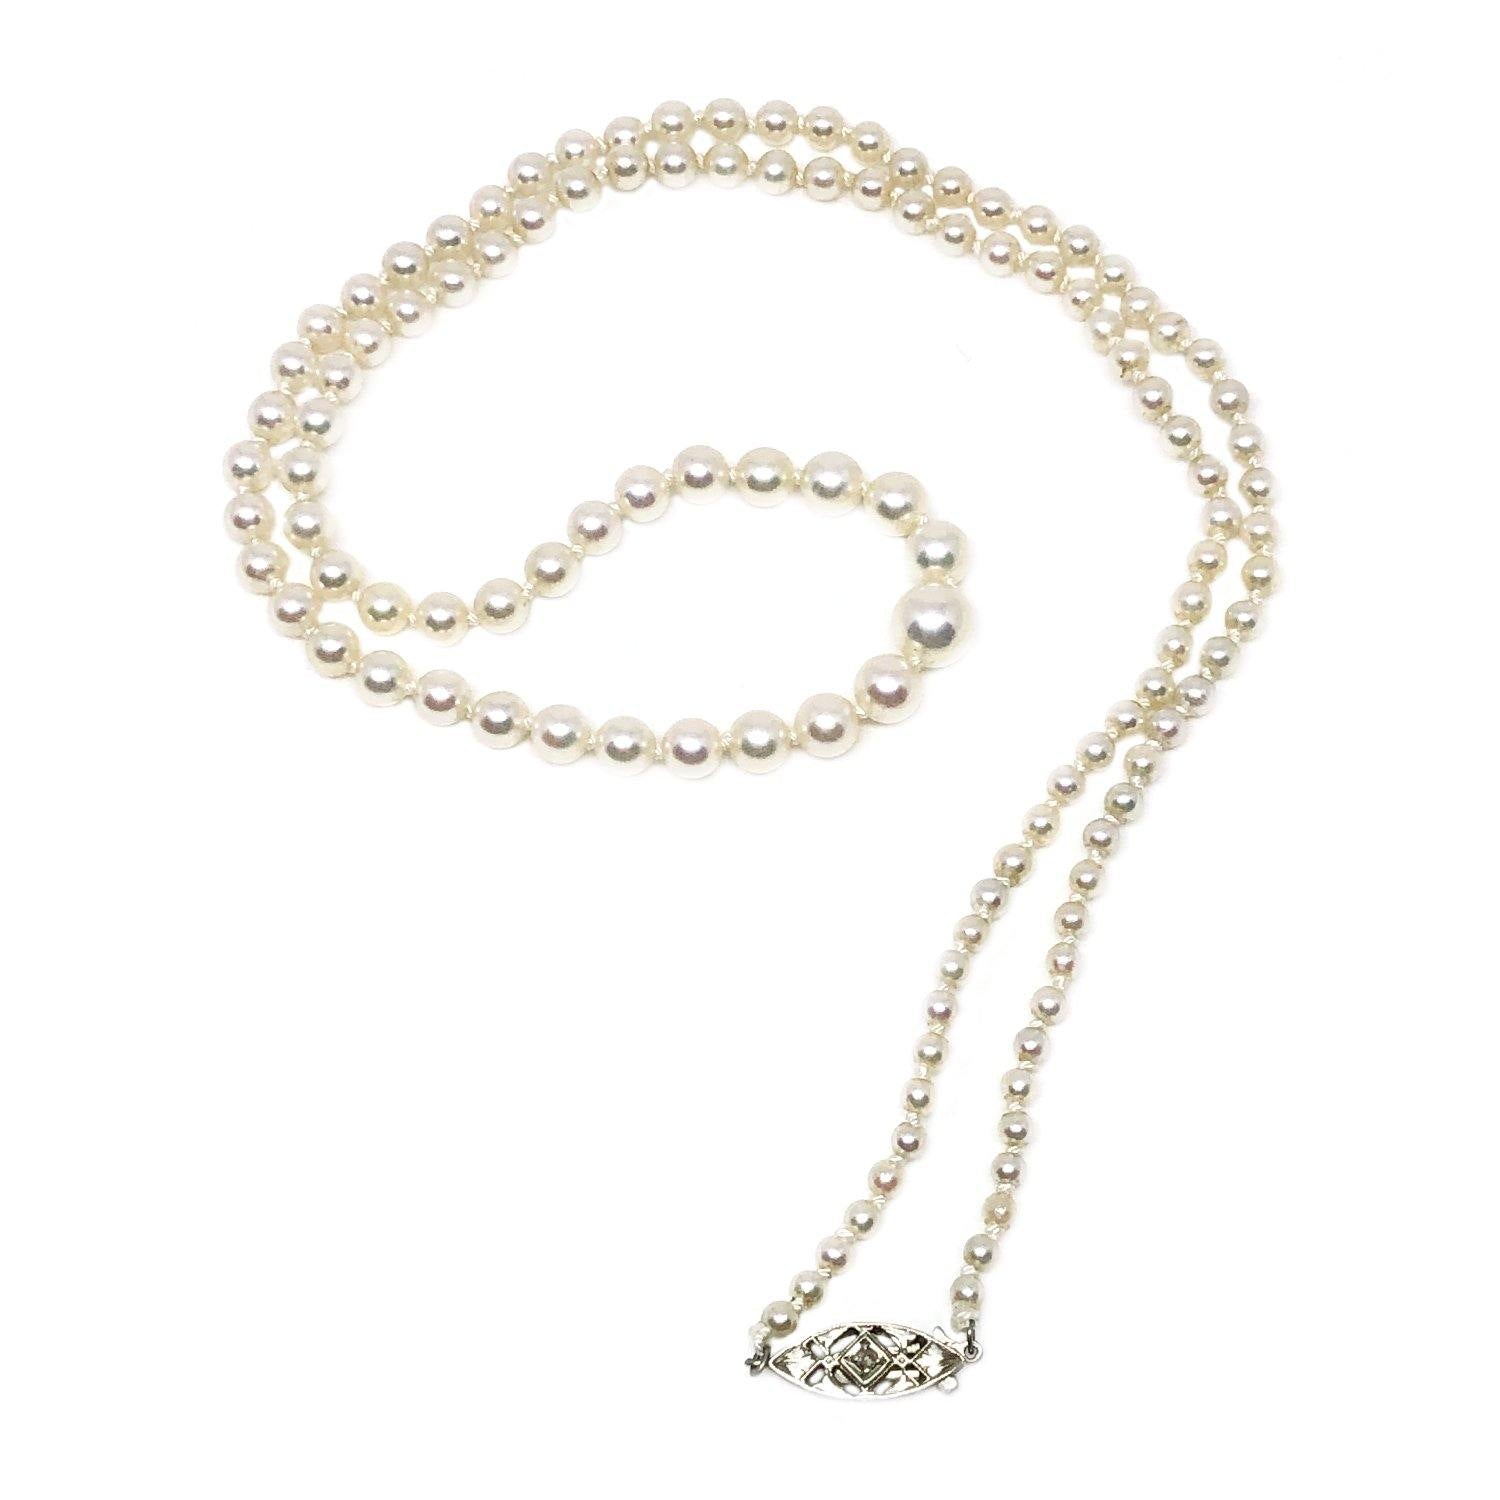 Art Nouveau Japanese Saltwater Cultured Akoya Pearl Necklace - 14K White Gold Diamond 21 Inch